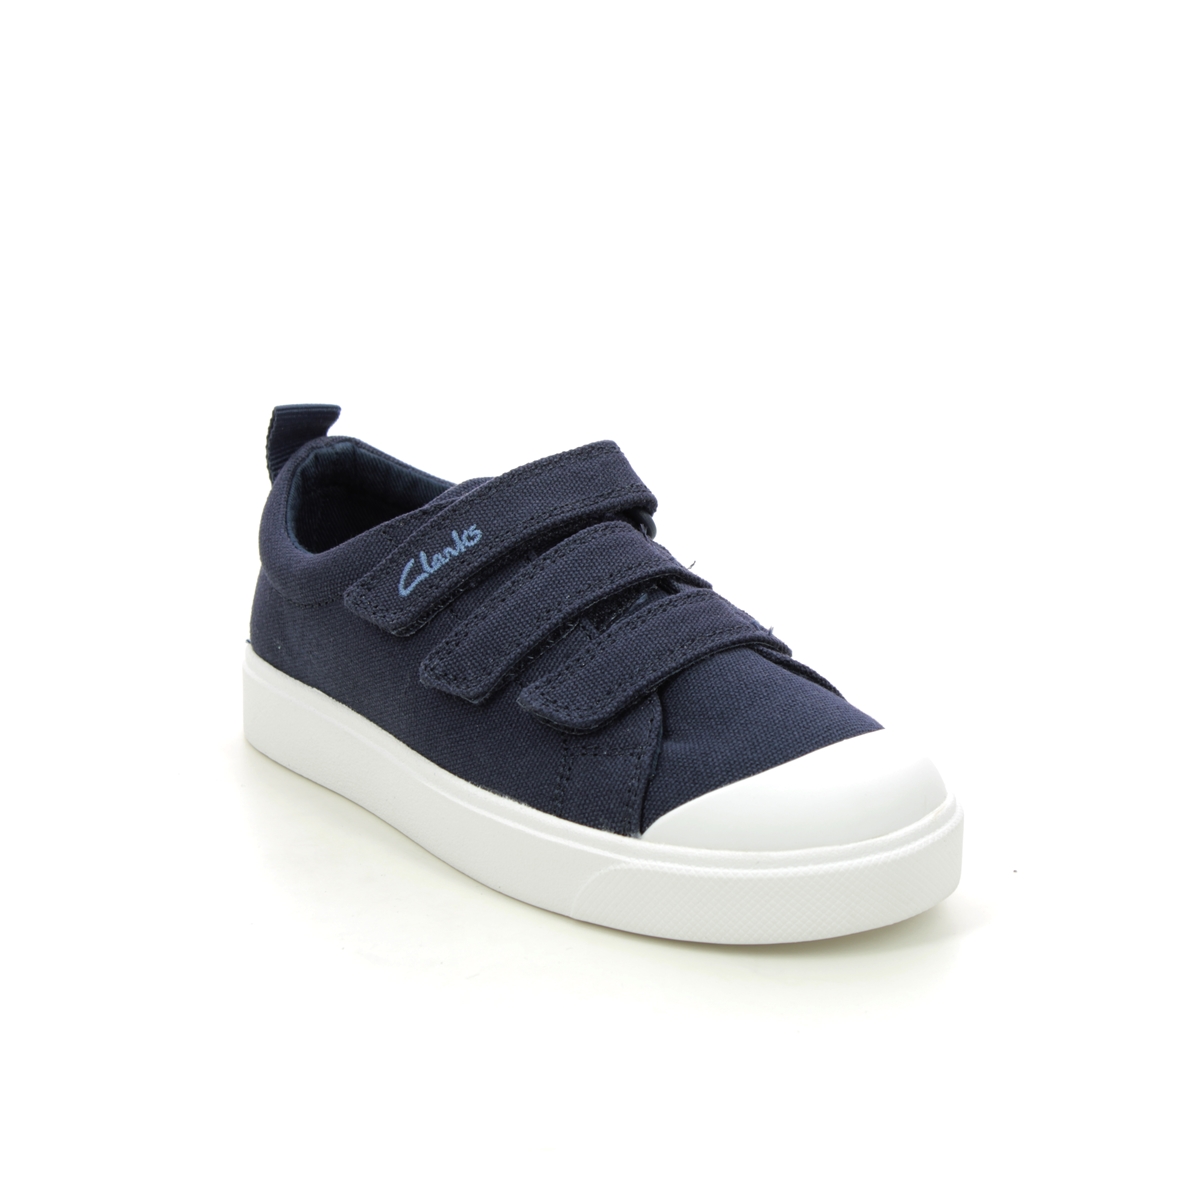 Clarks City Vibe K Navy Kids girls trainers 4911-57G in a Floral Canvas in Size 2.5